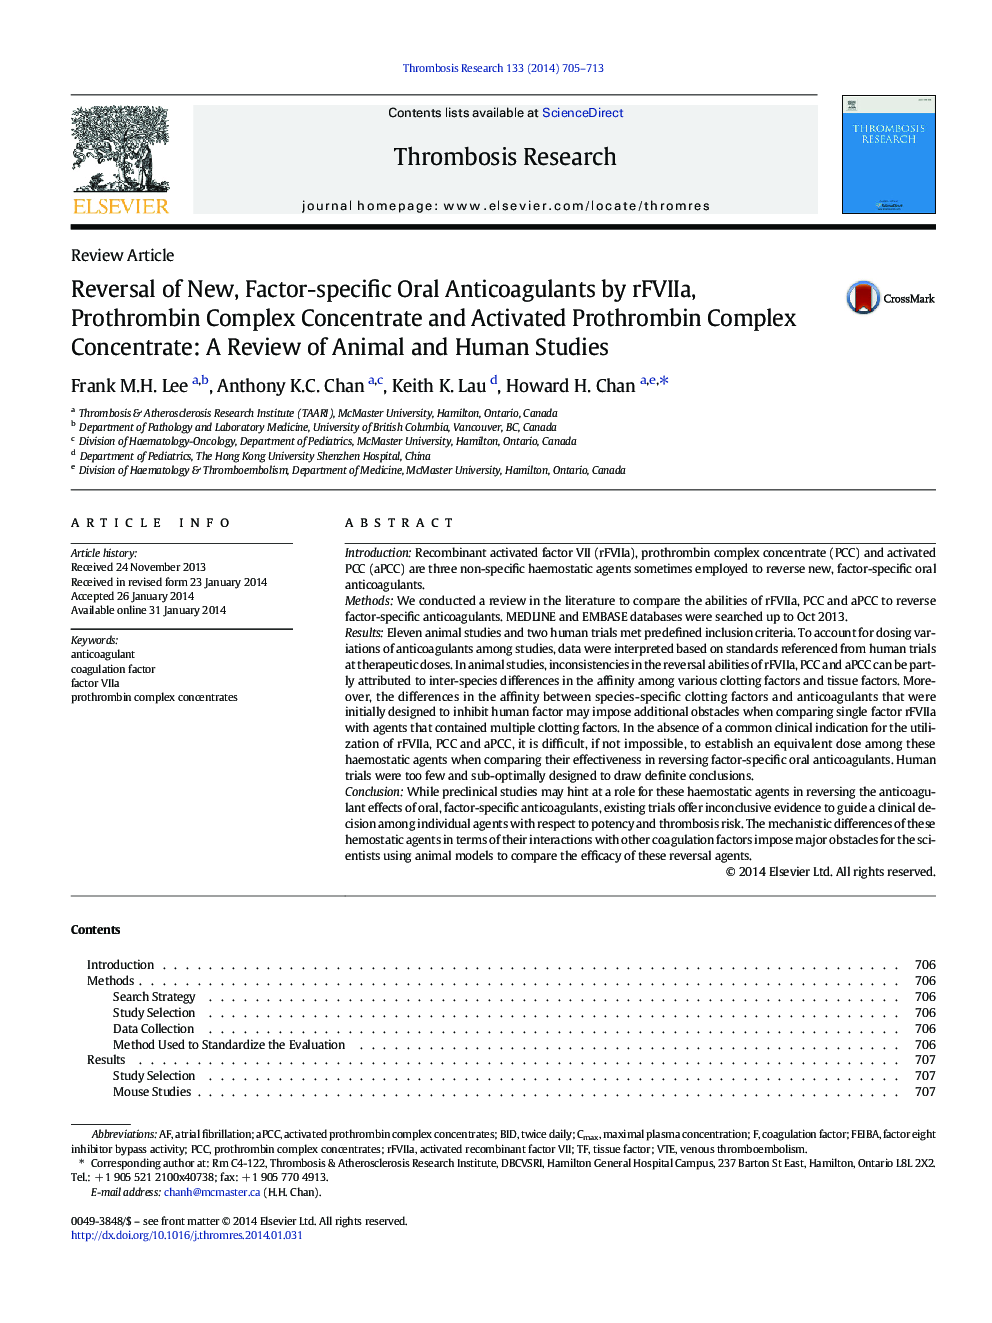 Reversal of New, Factor-specific Oral Anticoagulants by rFVIIa, Prothrombin Complex Concentrate and Activated Prothrombin Complex Concentrate: A Review of Animal and Human Studies